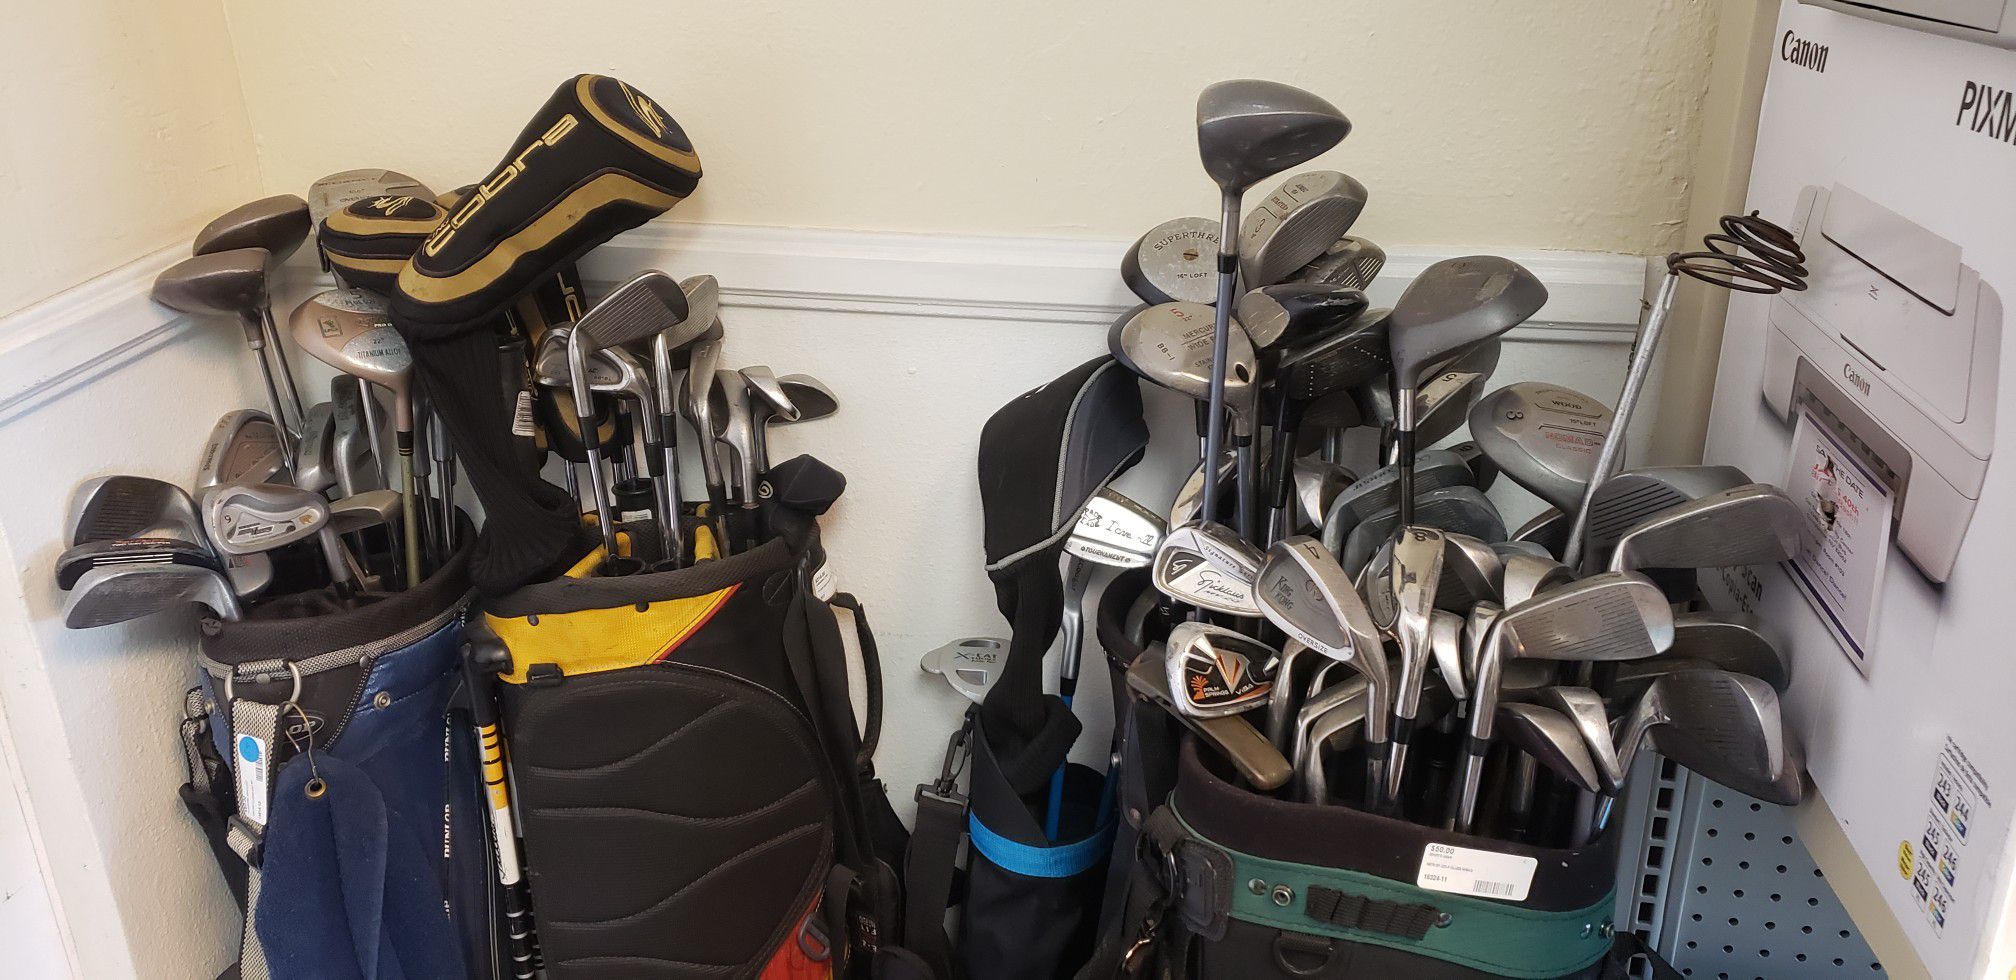 Variety sets of golf clubs.